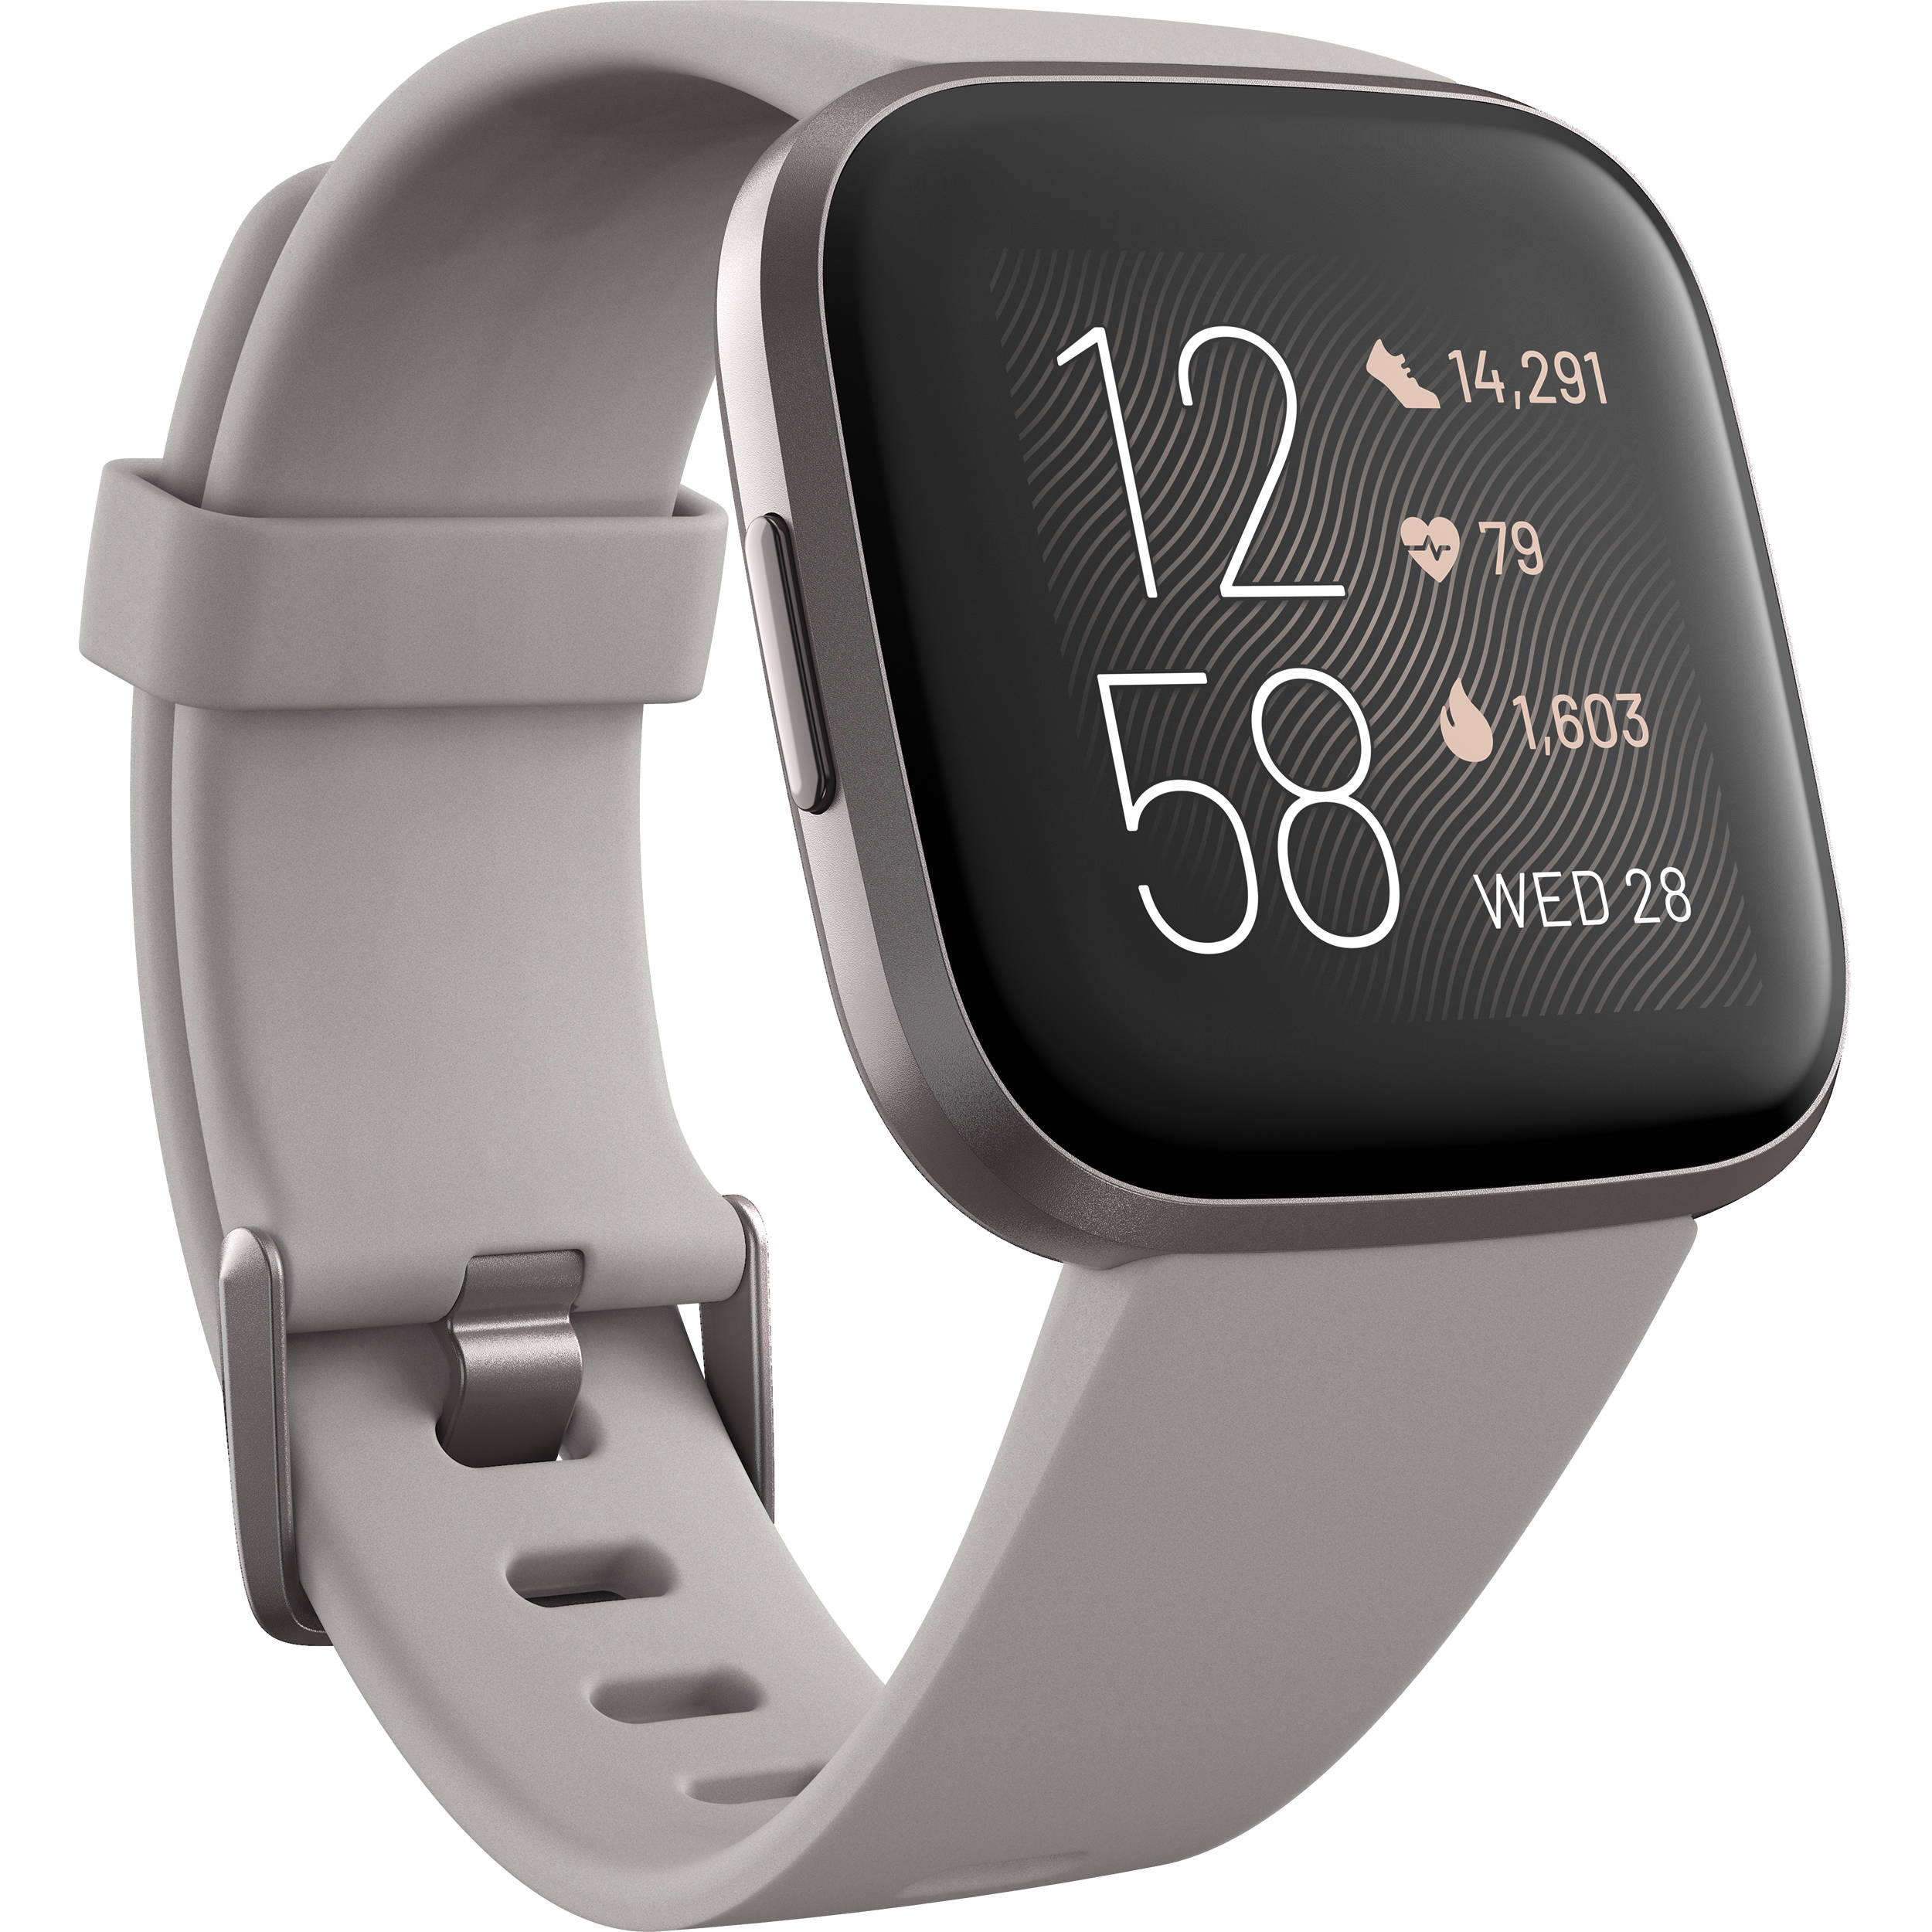 fitbit versa 2 fitness features